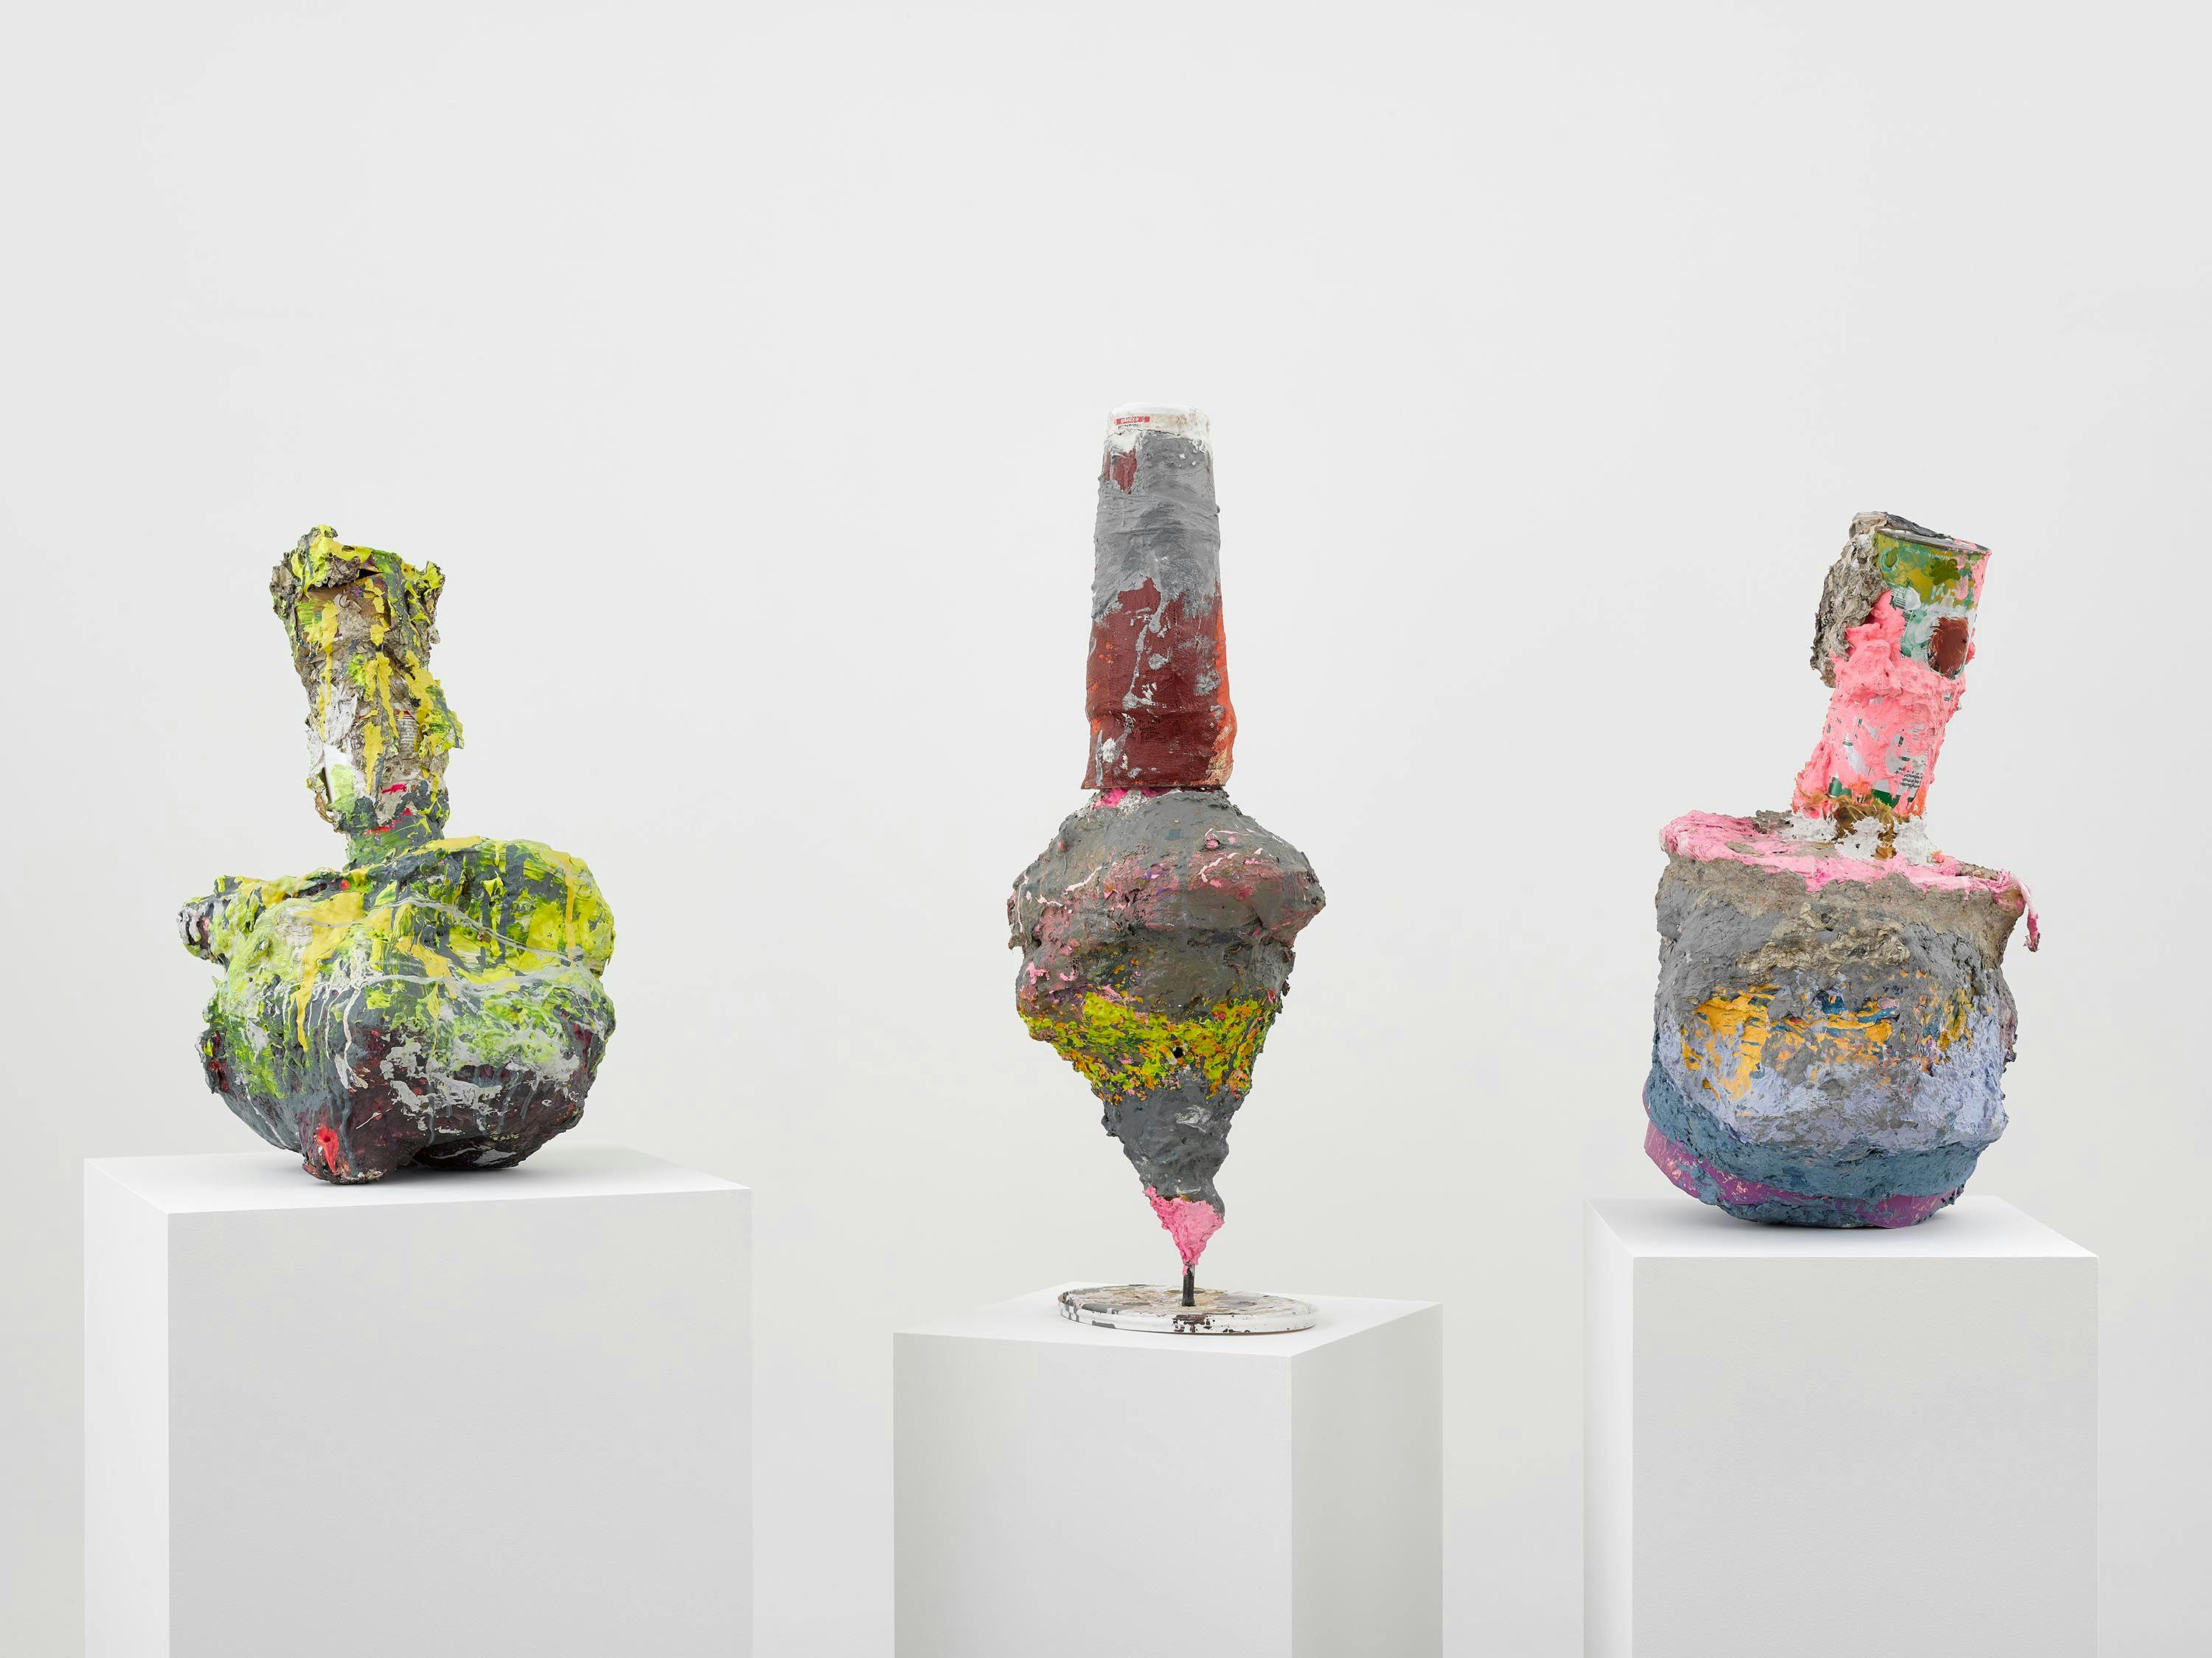 A sculpture by Franz West, titled Three Times the Same, dated 1998.